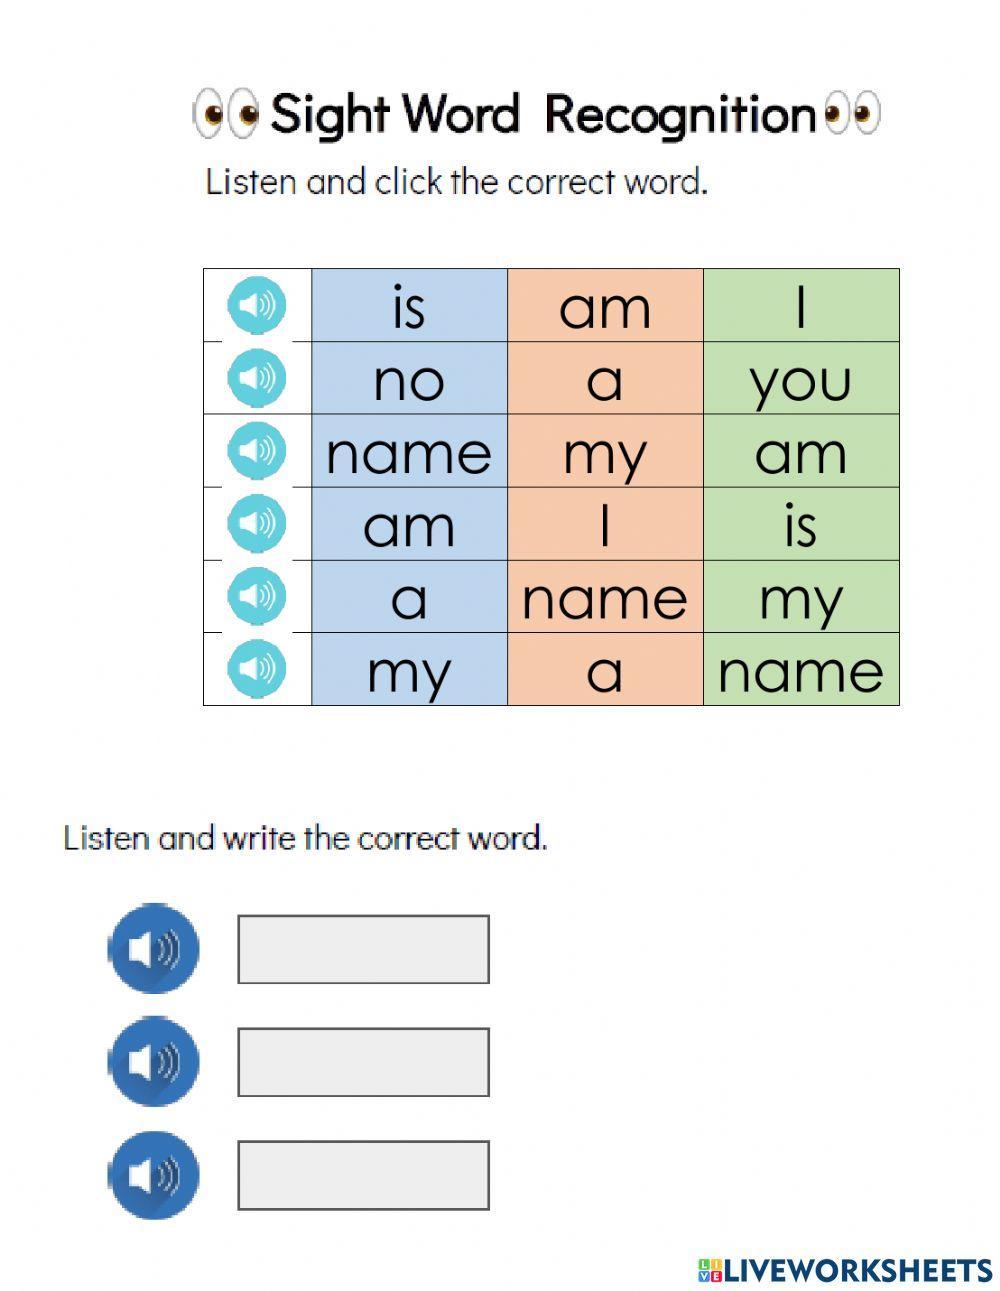 Sight words recognition